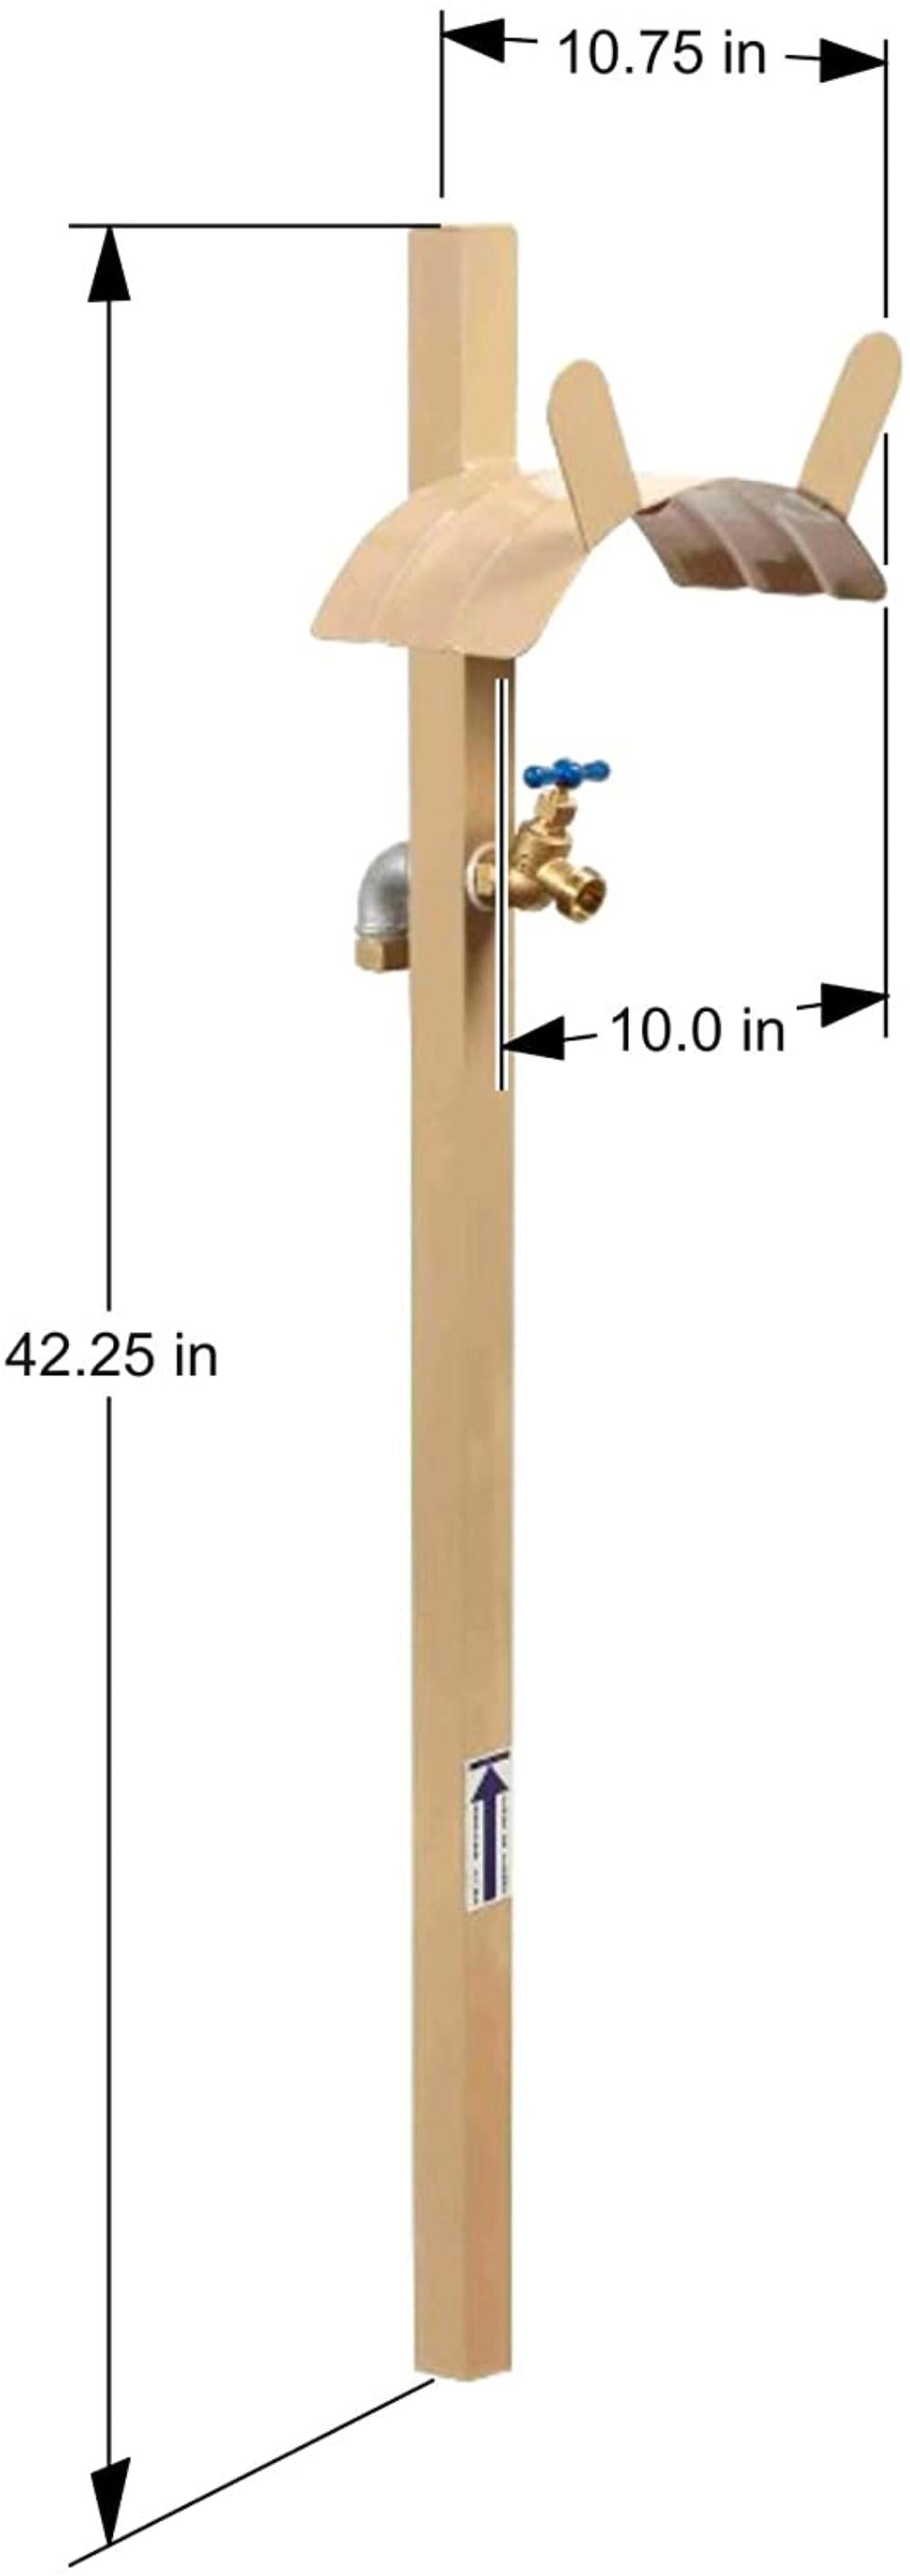 5/8-Inch Liberty Garden Products 693-2 Free Garden Hose Stand with Brass Faucet Holds 150-Feet of Tan 